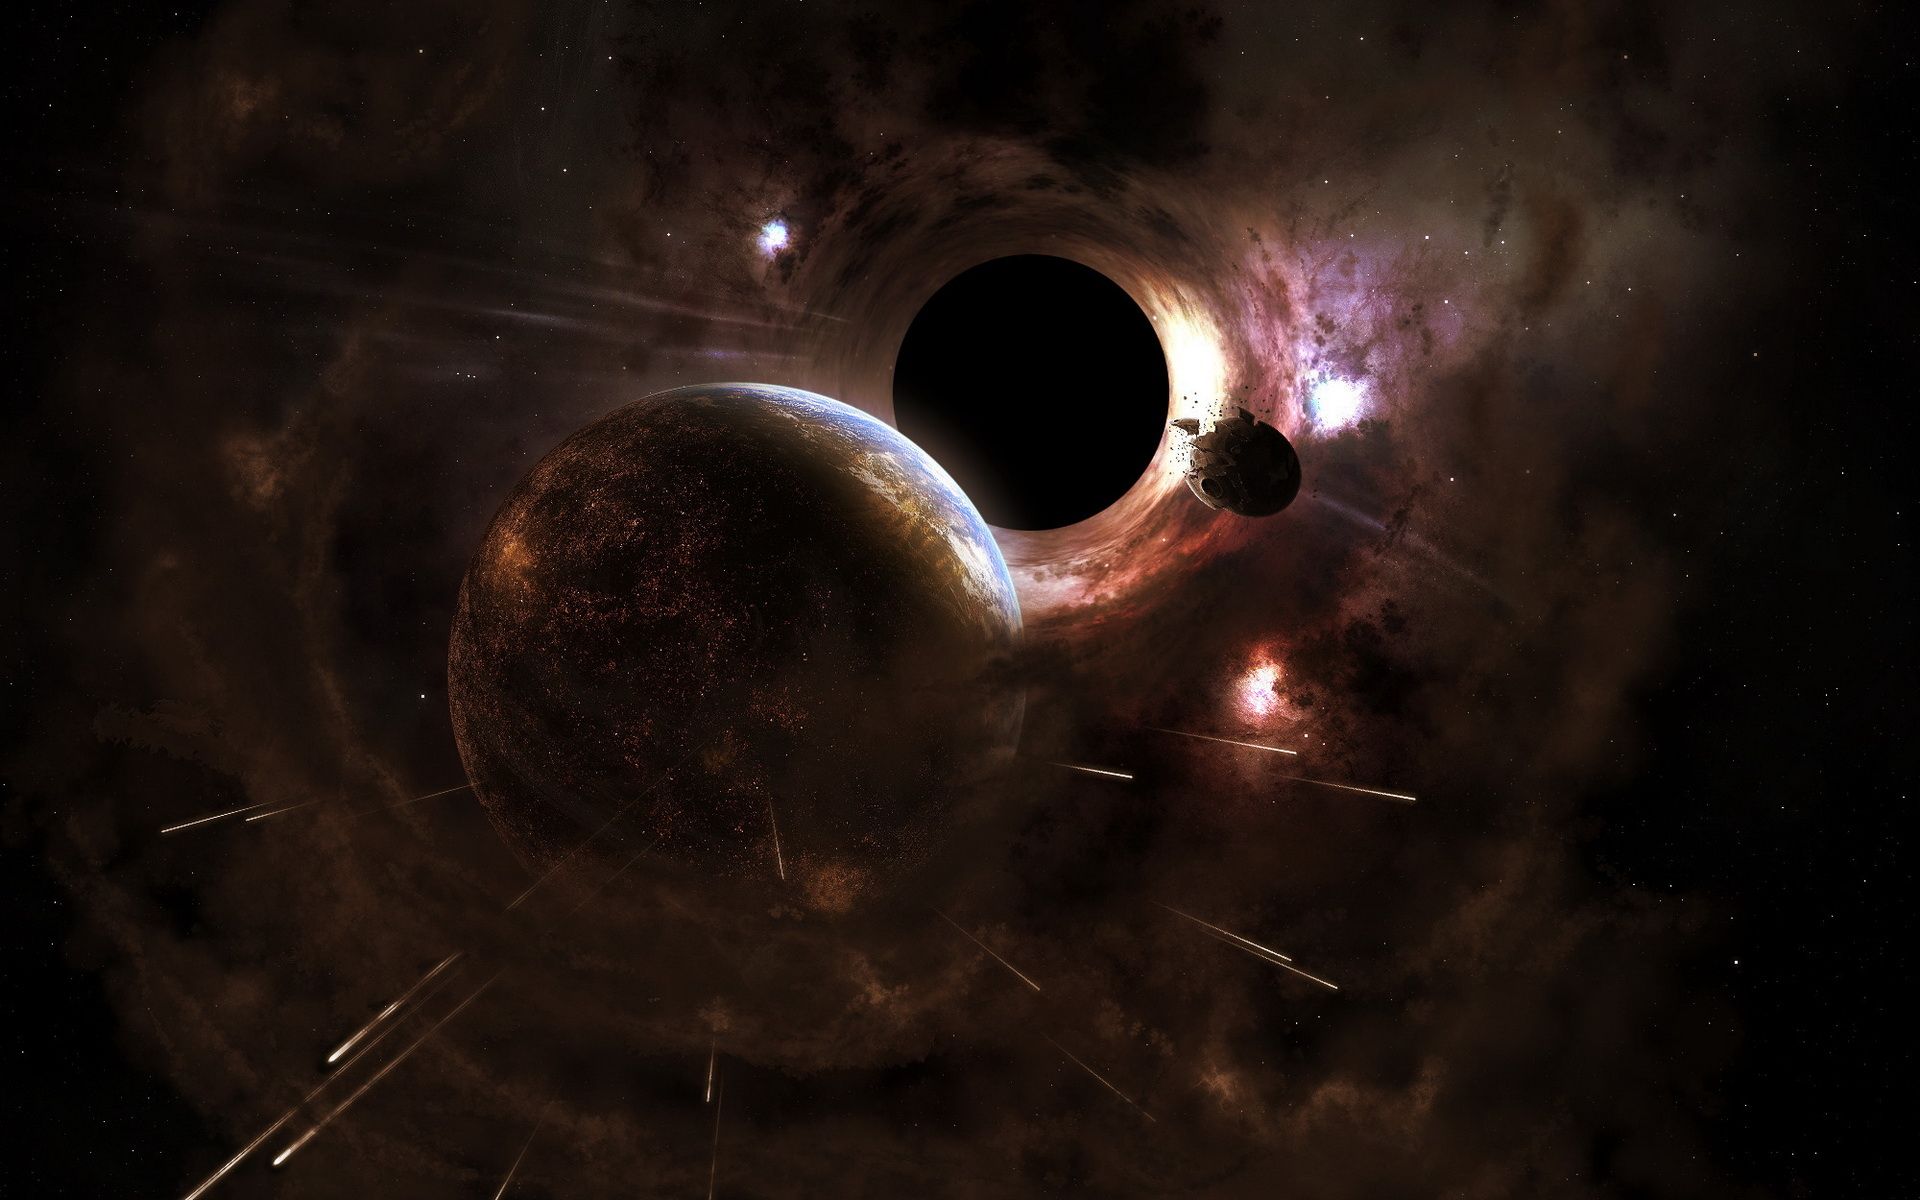 Black Hole Wallpaper 1920x1200 - Pics about space